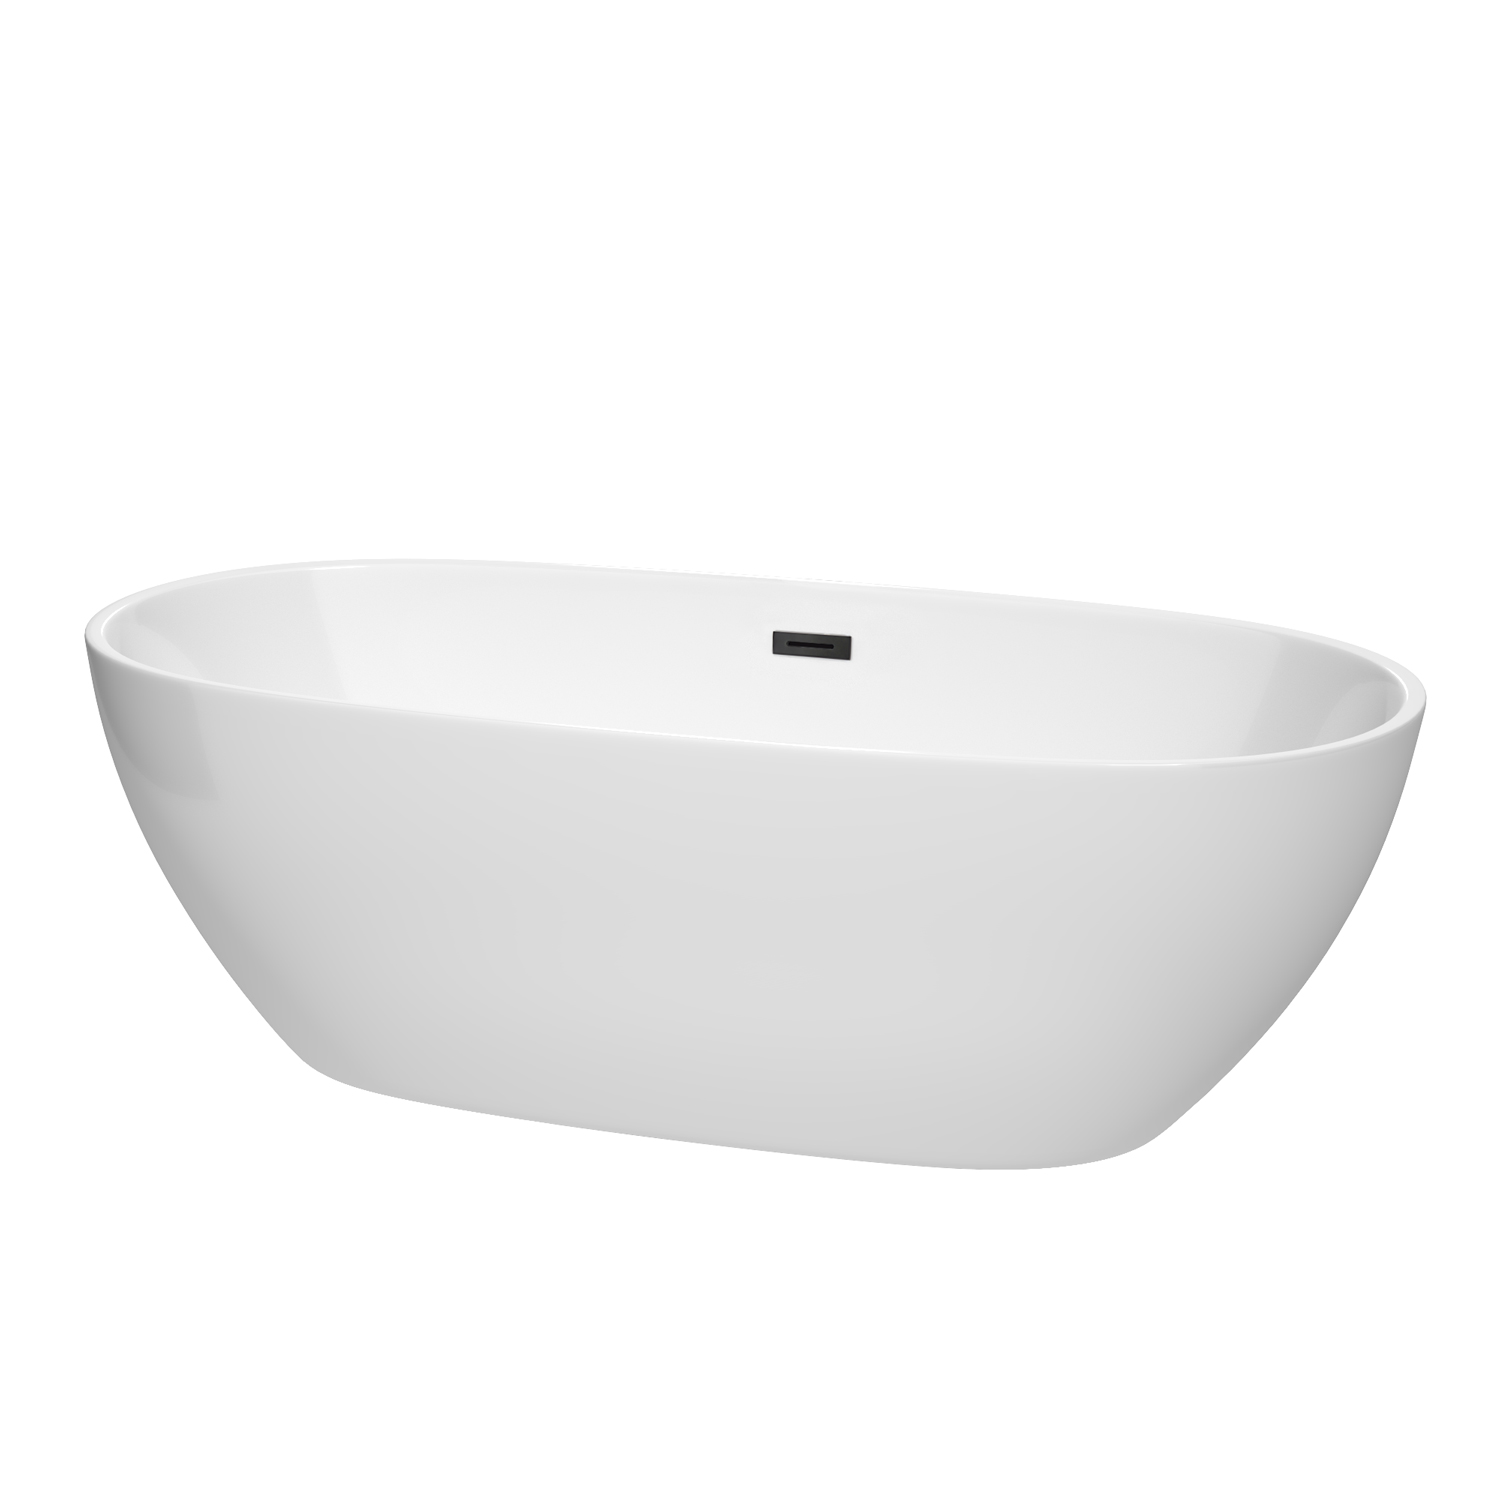 71" Freestanding Bathtub in White Finish with Matte Black Pop-up Drain and Overflow Trim 